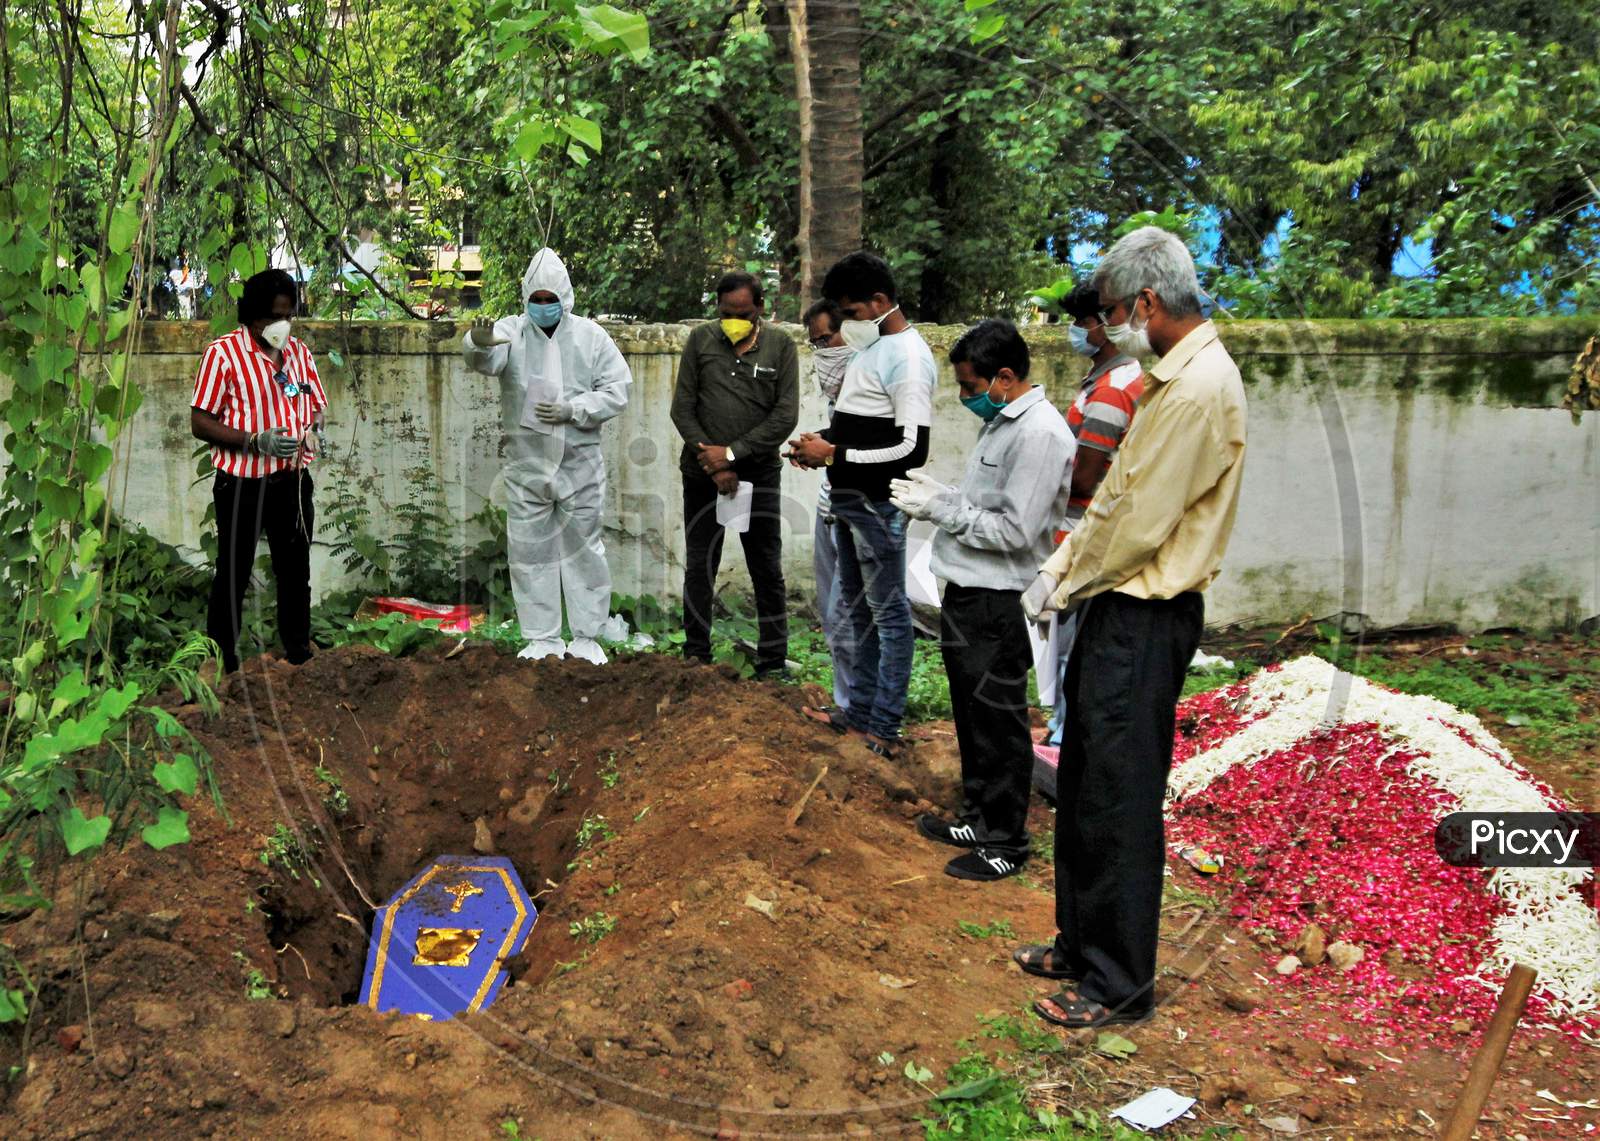 A priest wearing personal protective equipment (PPE) and the relatives pray over the coffin of a person who died from the coronavirus disease (COVID-19) during a funeral at a cemetery in Mumbai, India June 27, 2020.